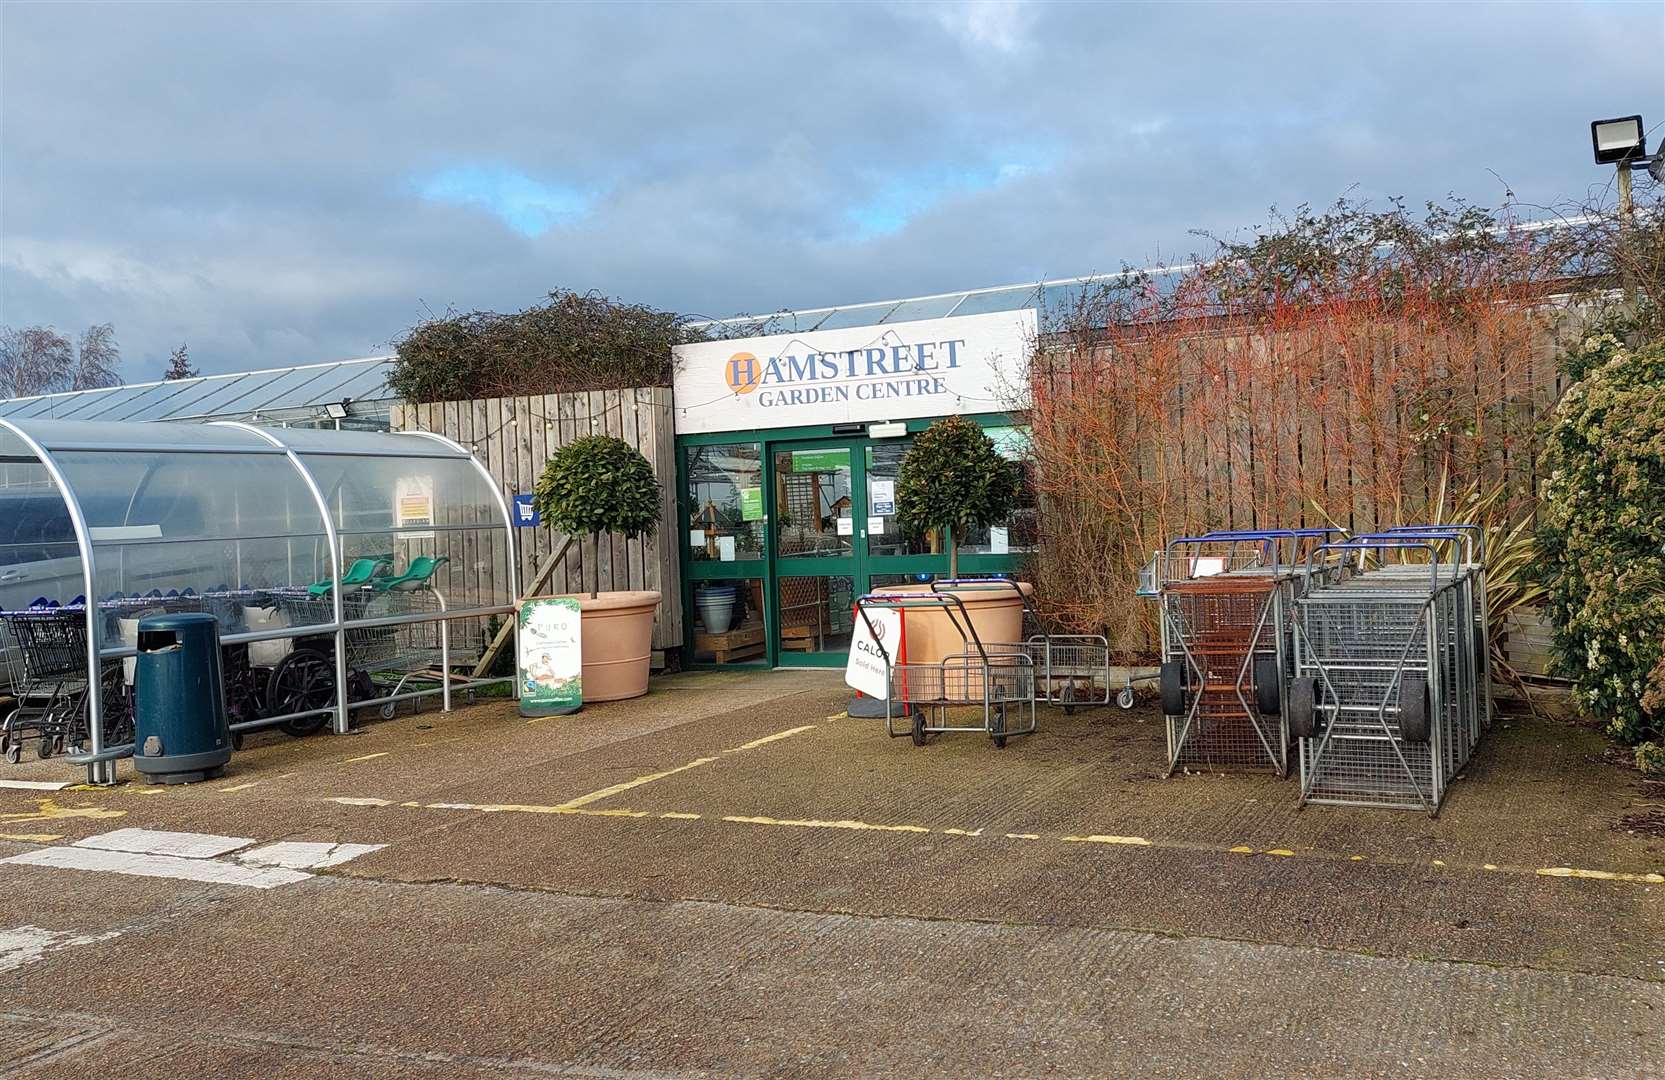 Hamstreet Garden Centre could be renovated